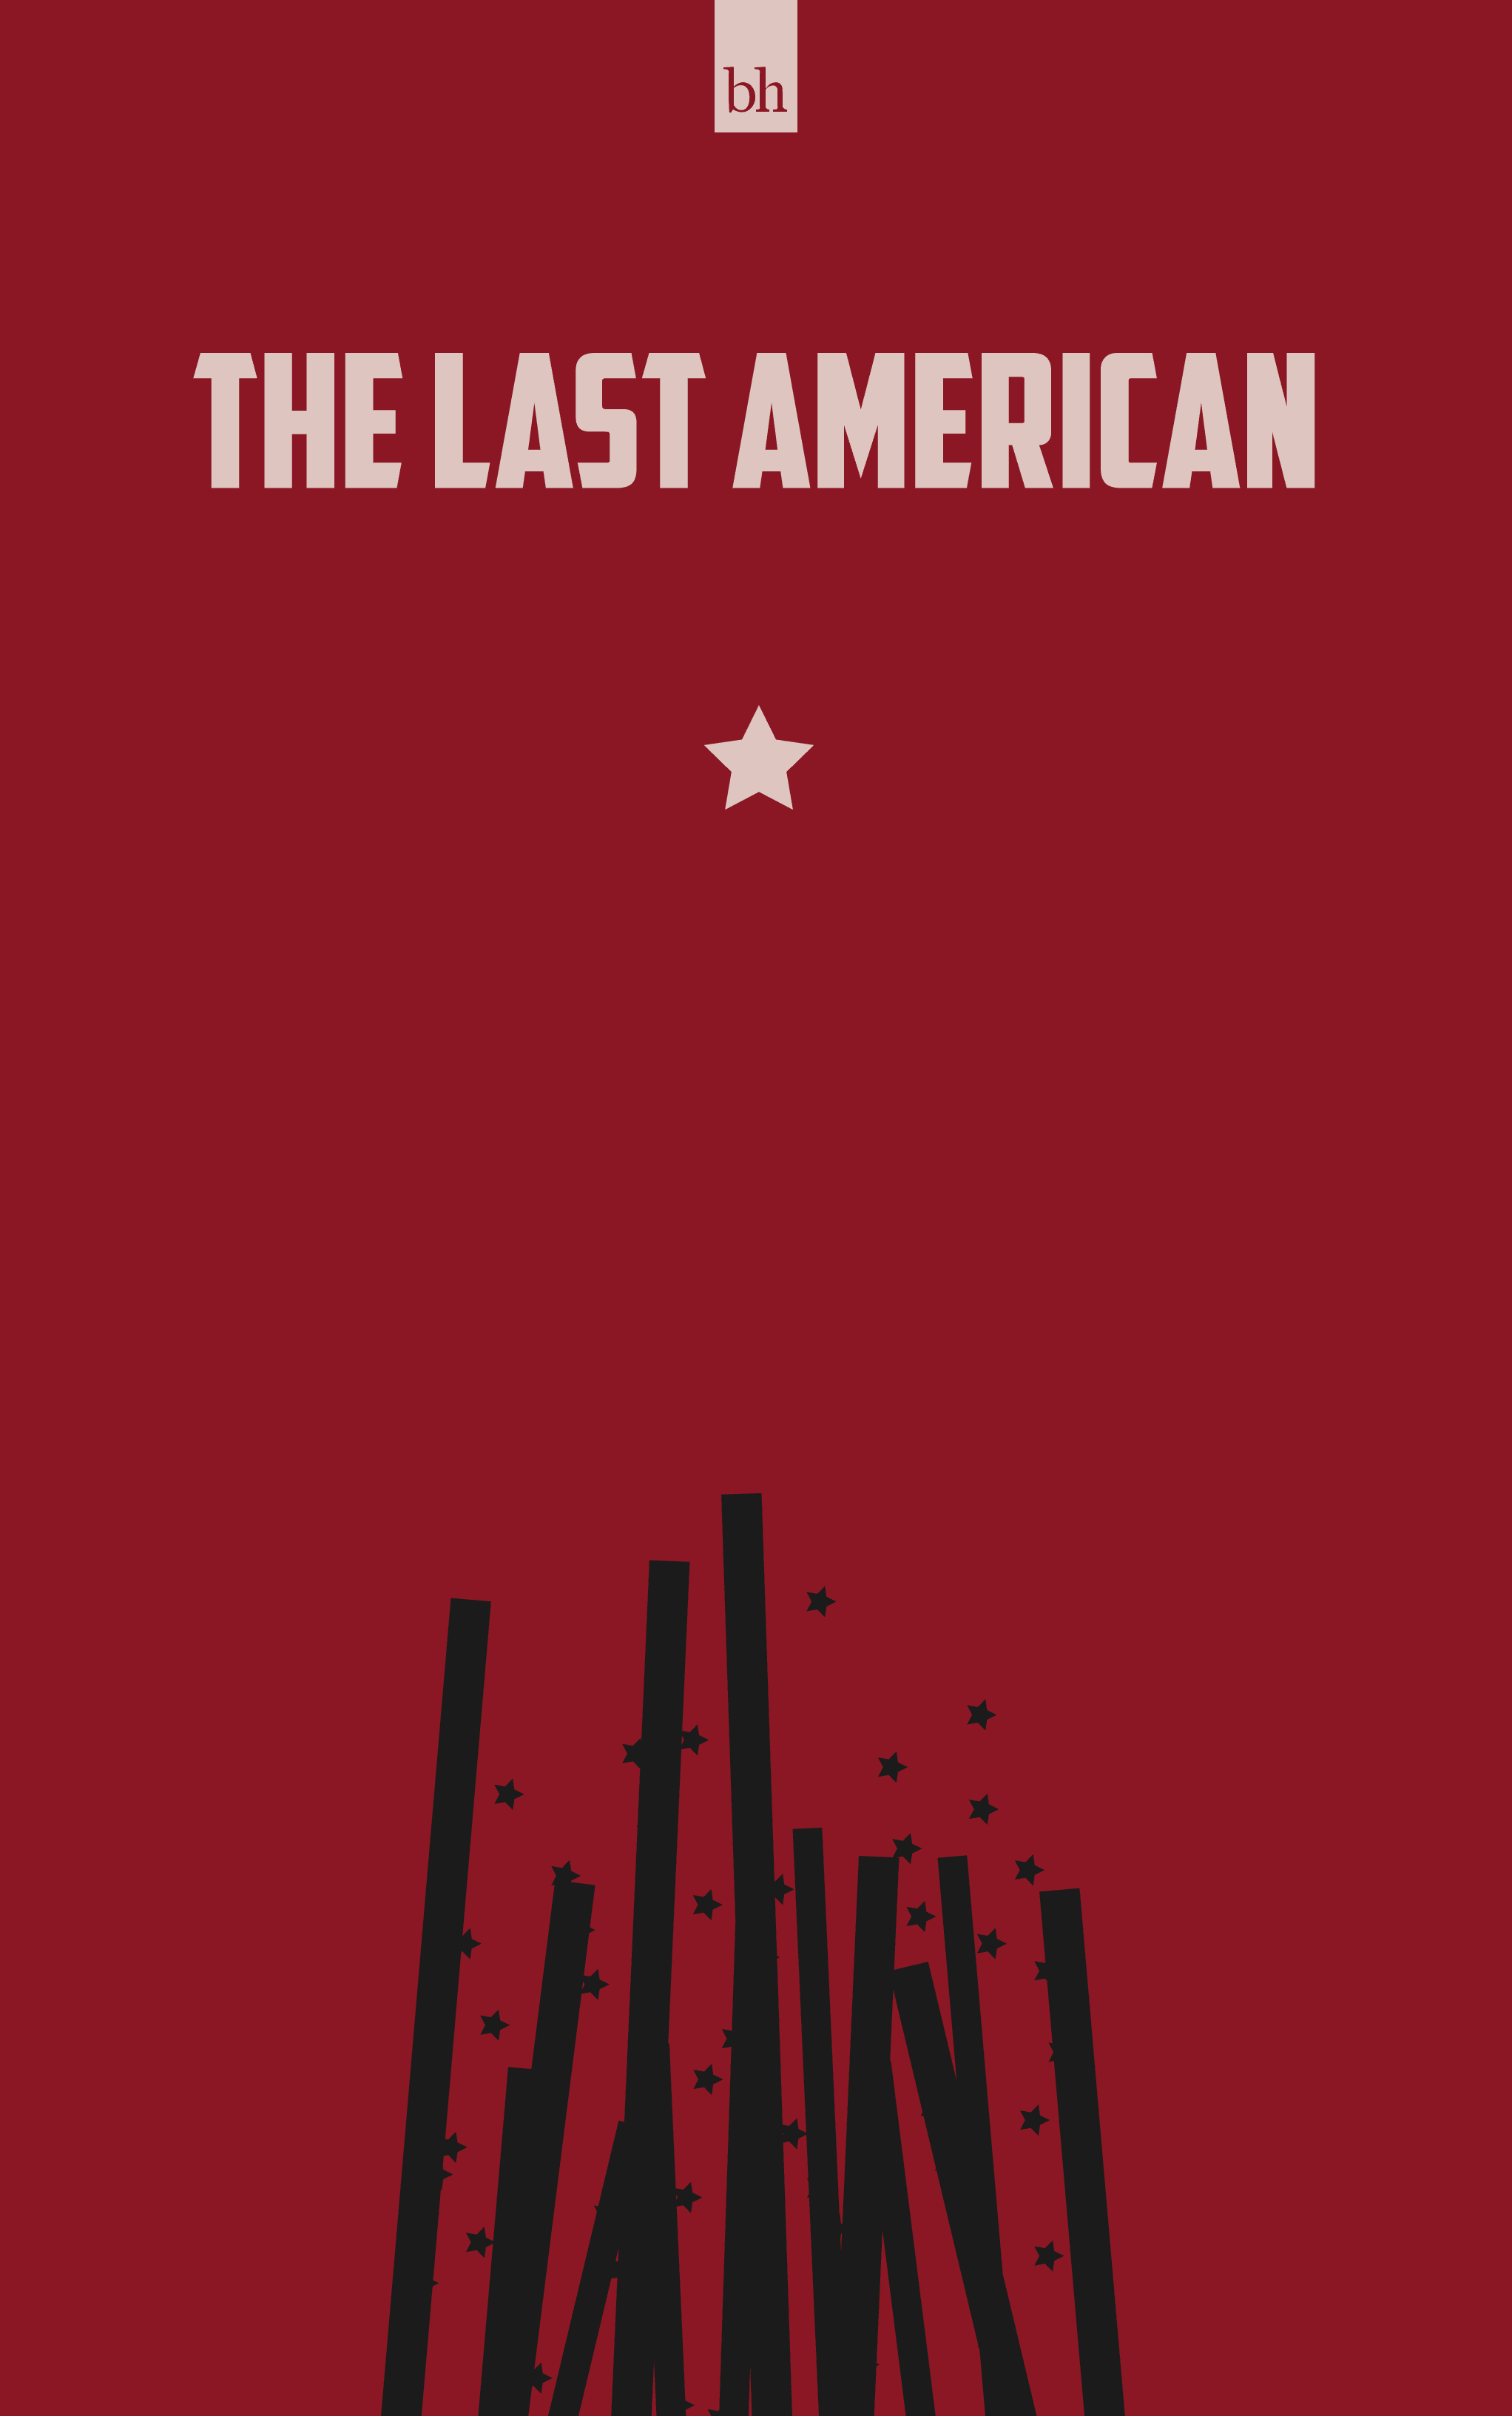 The Last American by John Wagner and Alan Grant